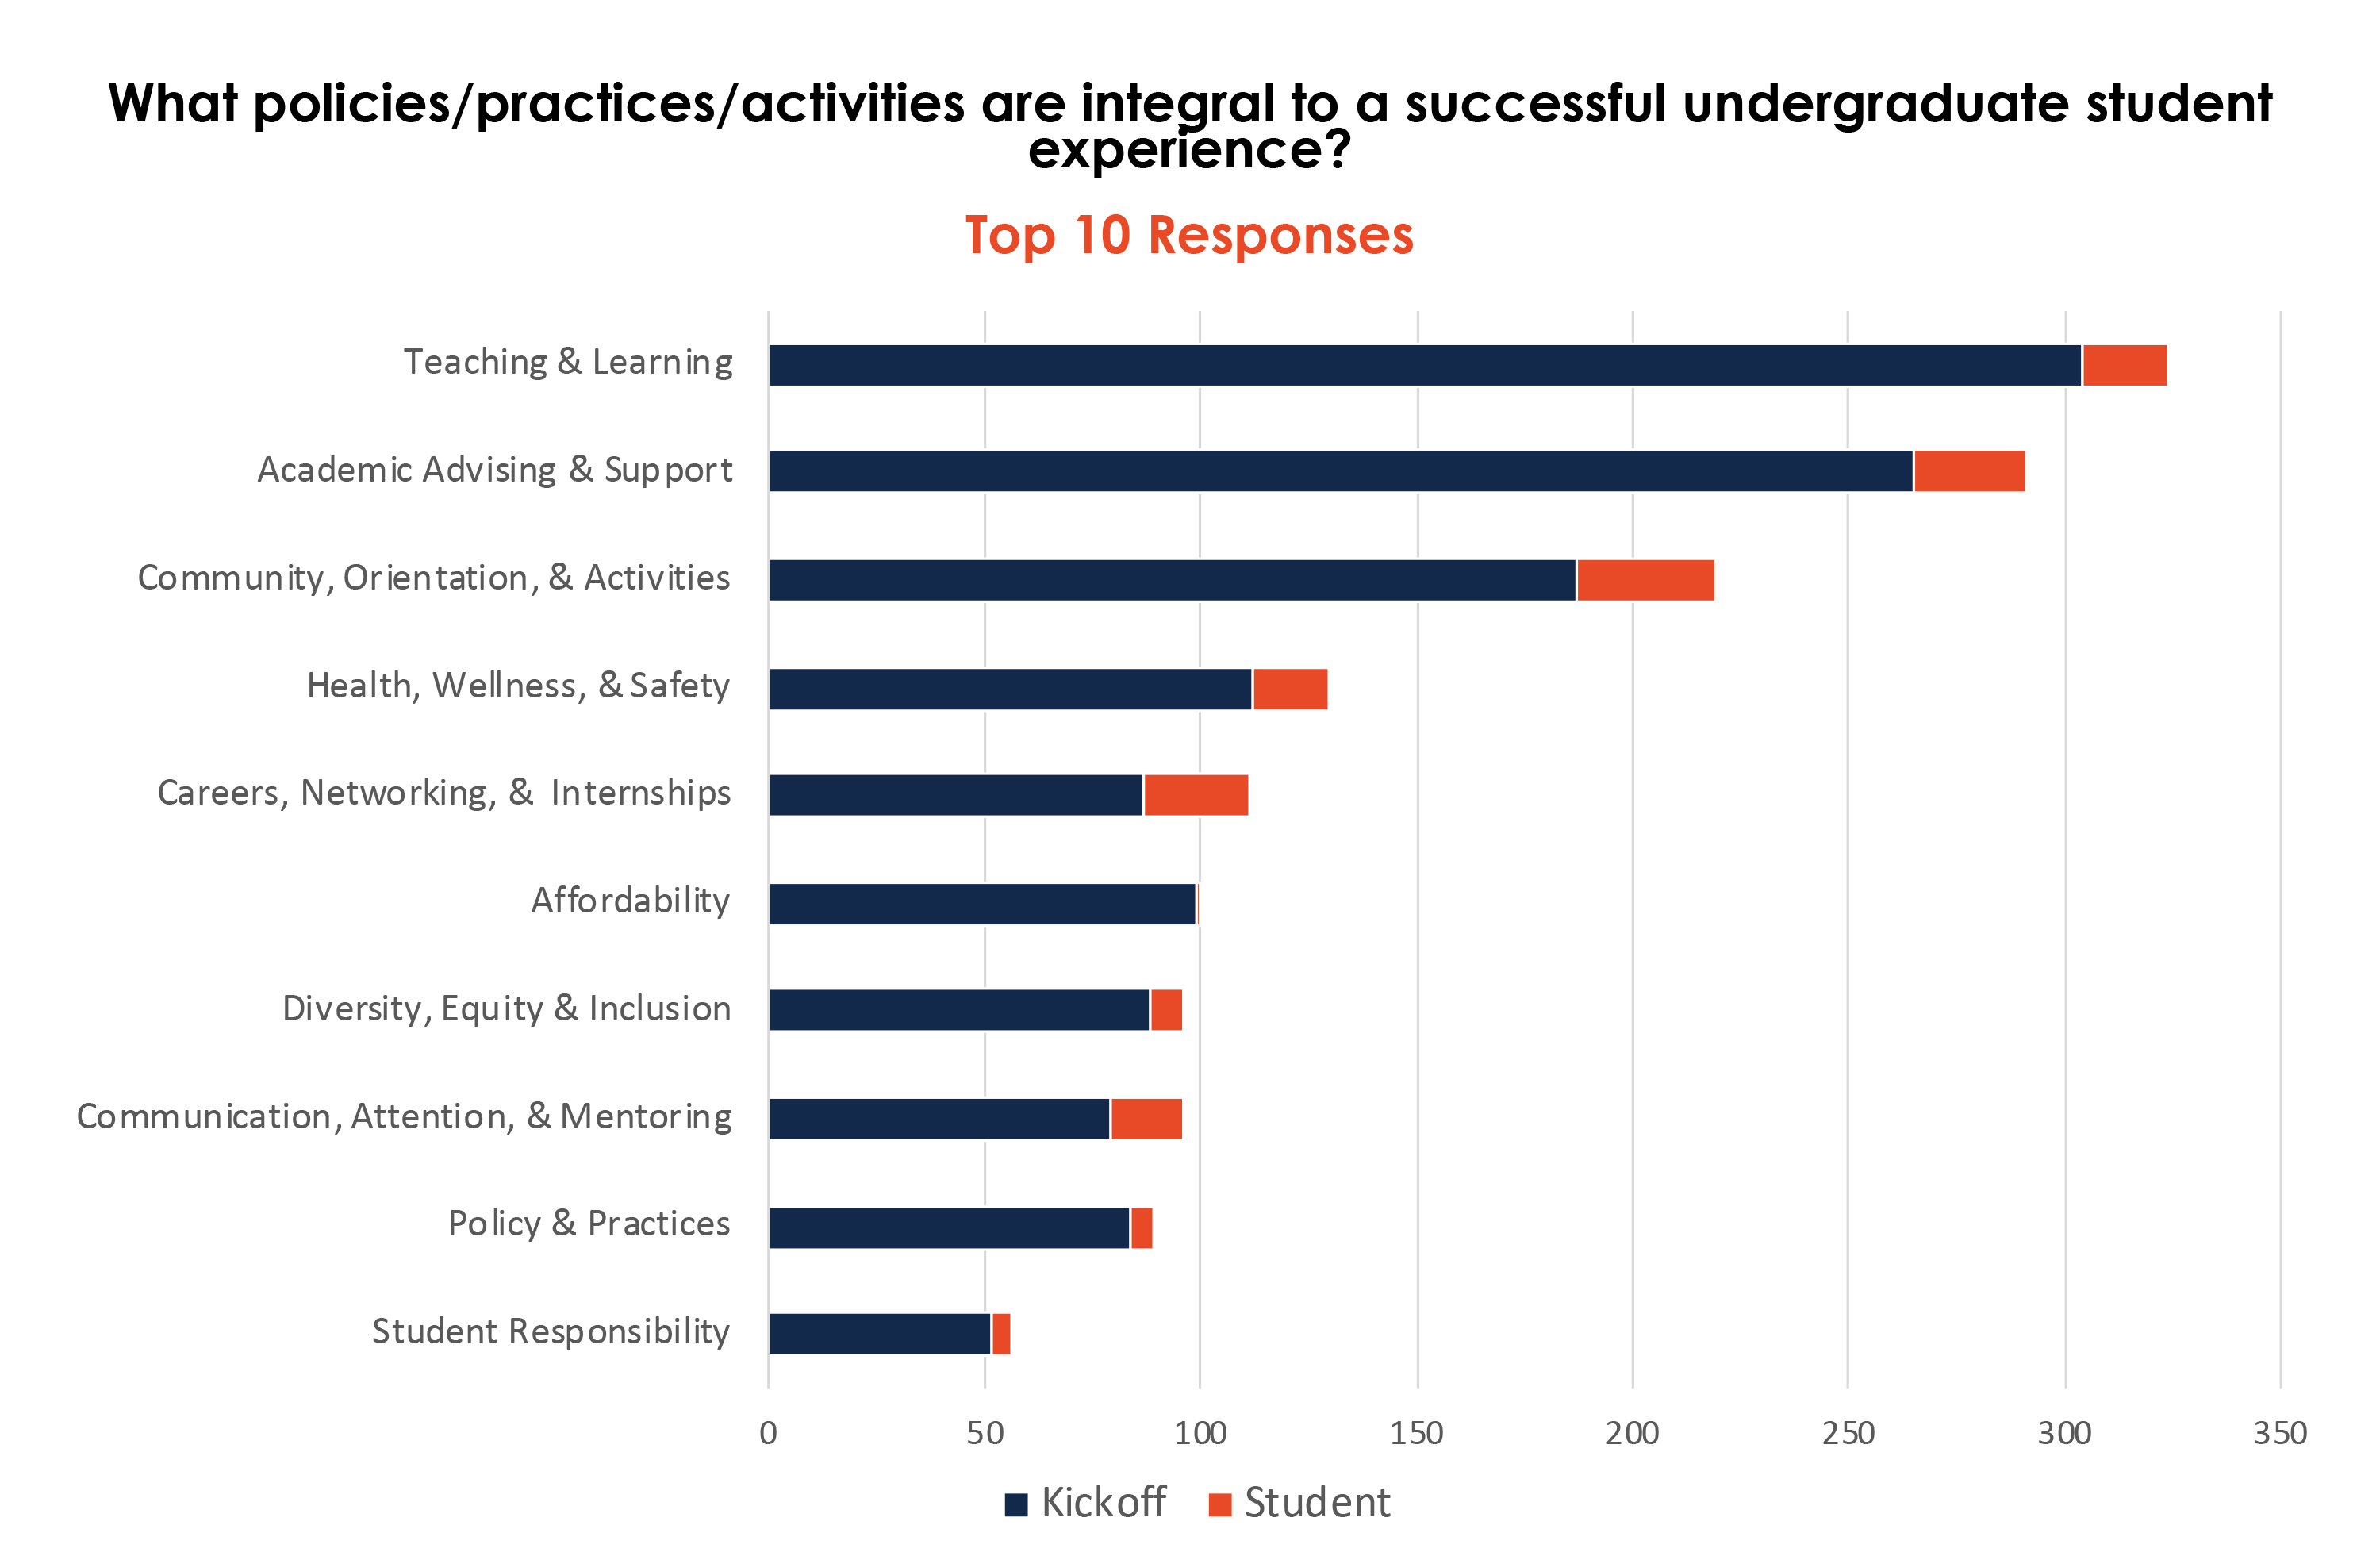 The top ten policies/practices/activities that are integral to a successful undergraduate student experience